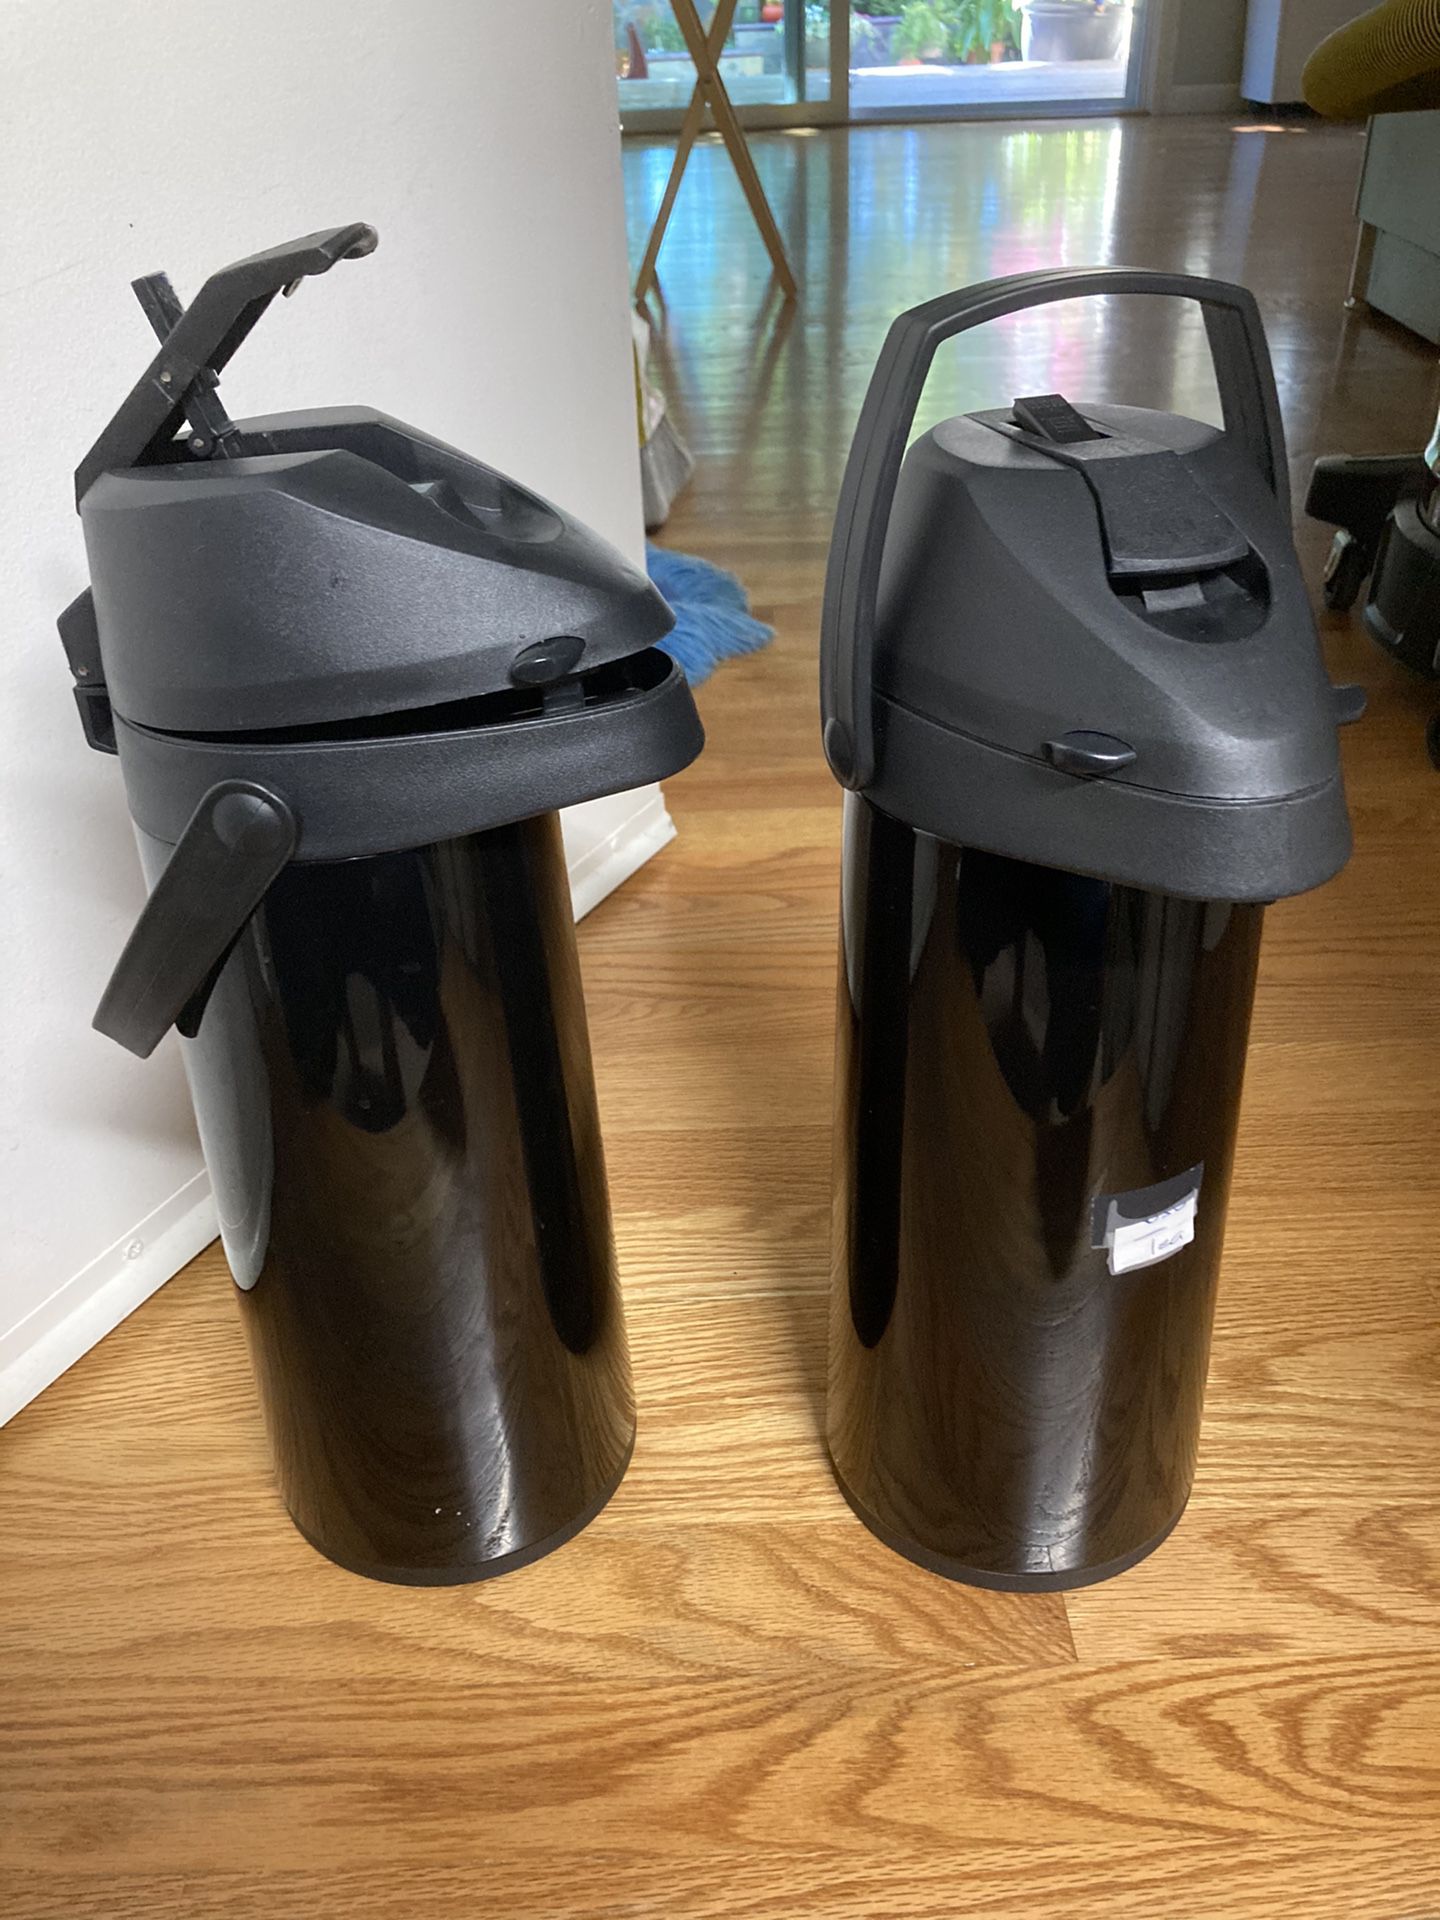 2x 2.2L carafe airpots servers for coffee tea hot water